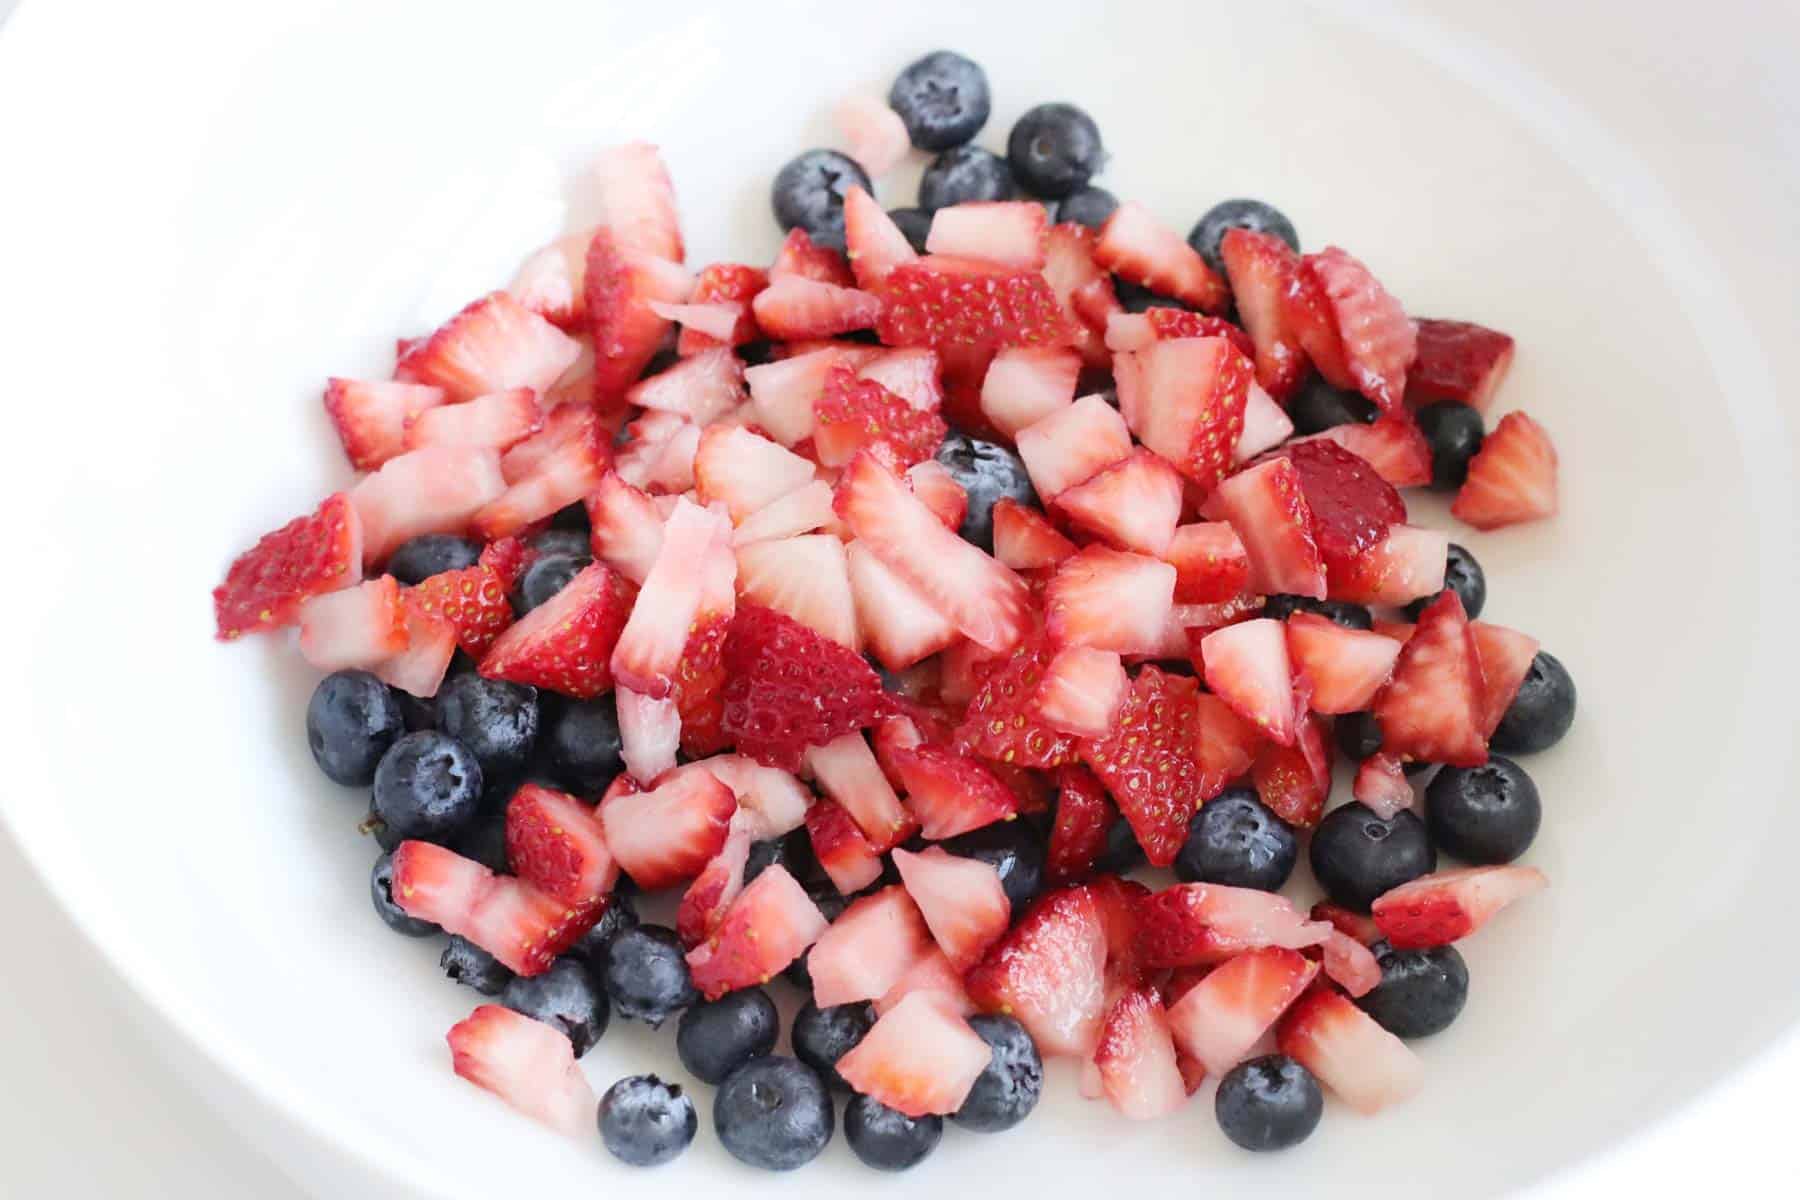 chopped strawberries and blueberries in a large bowl